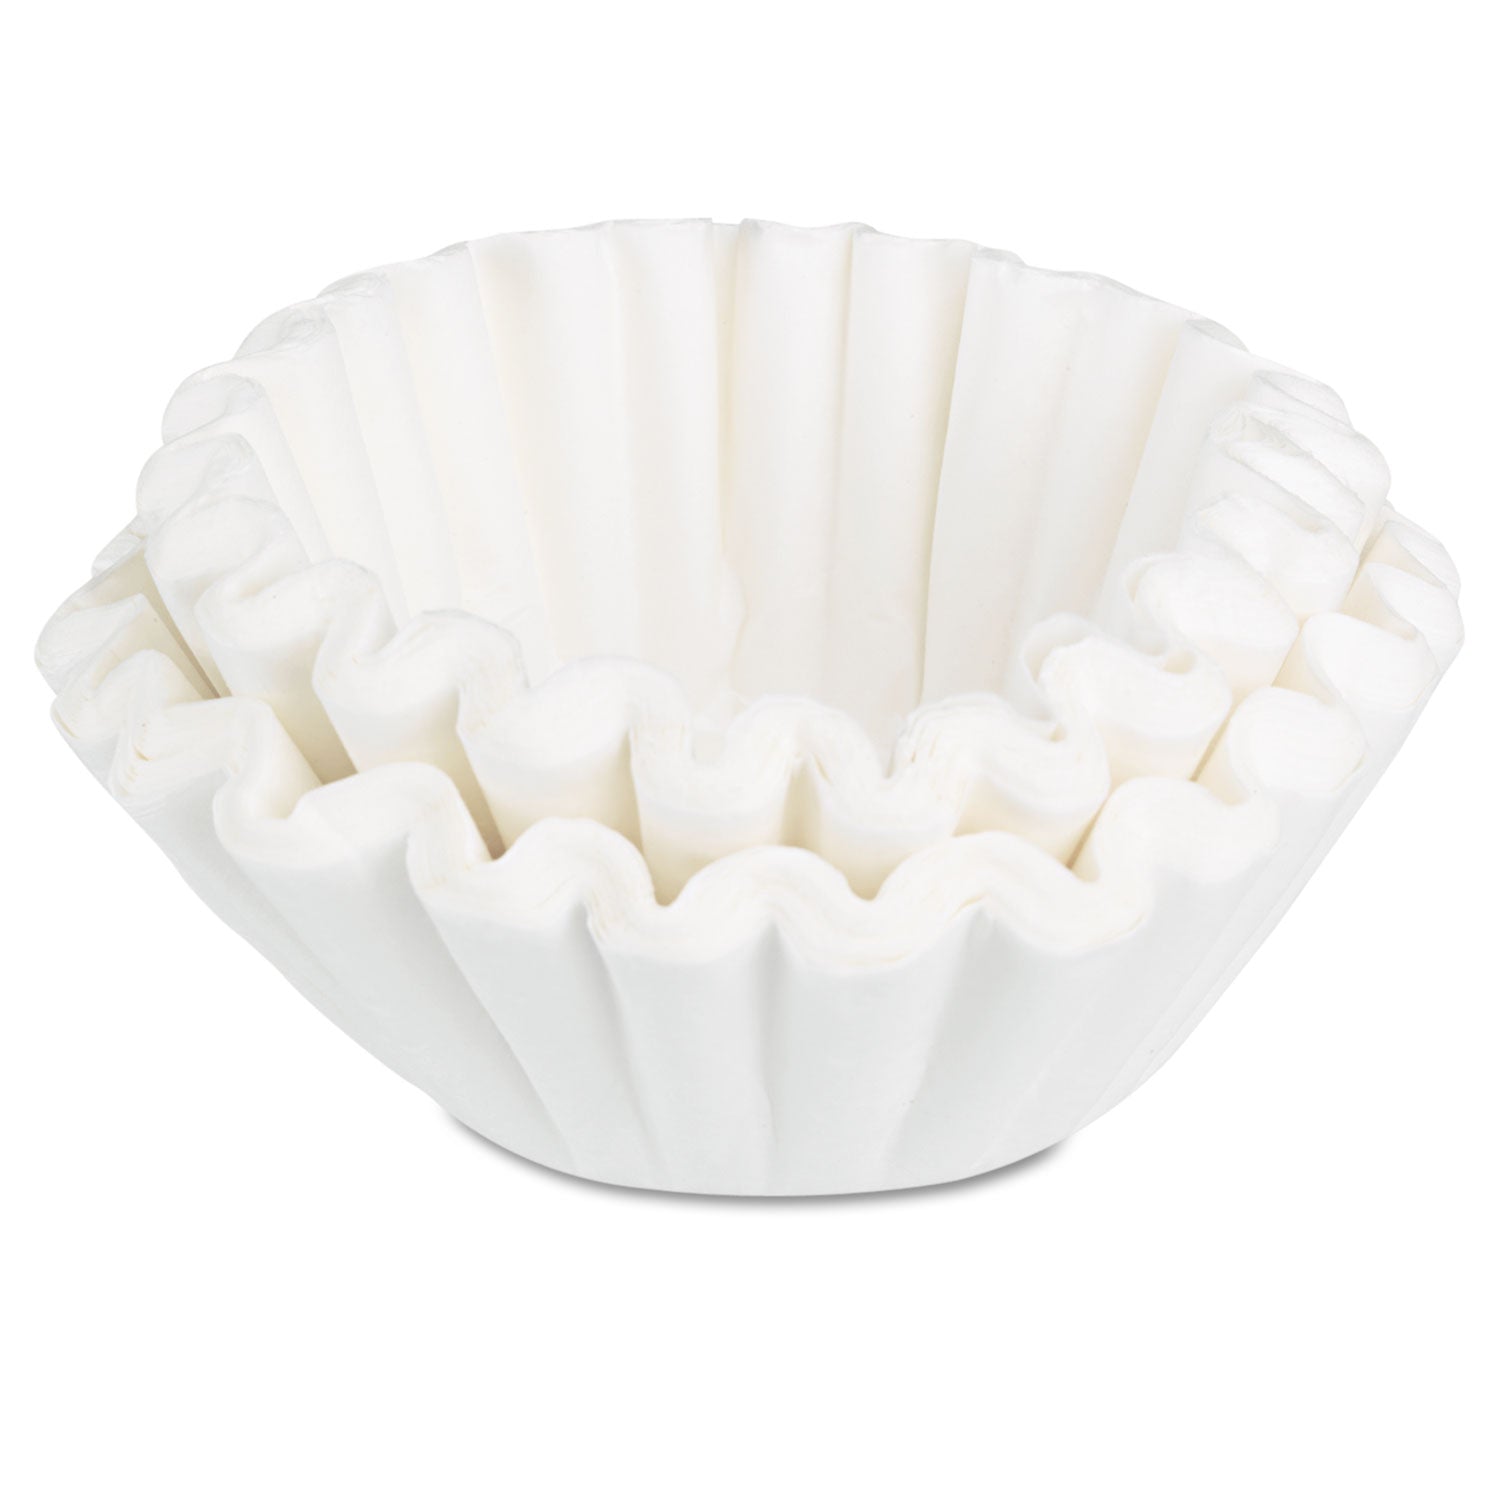 Coffee Filters, 8 to 12 Cup Size, Flat Bottom, 100/Pack, 12 Packs/Carton - 